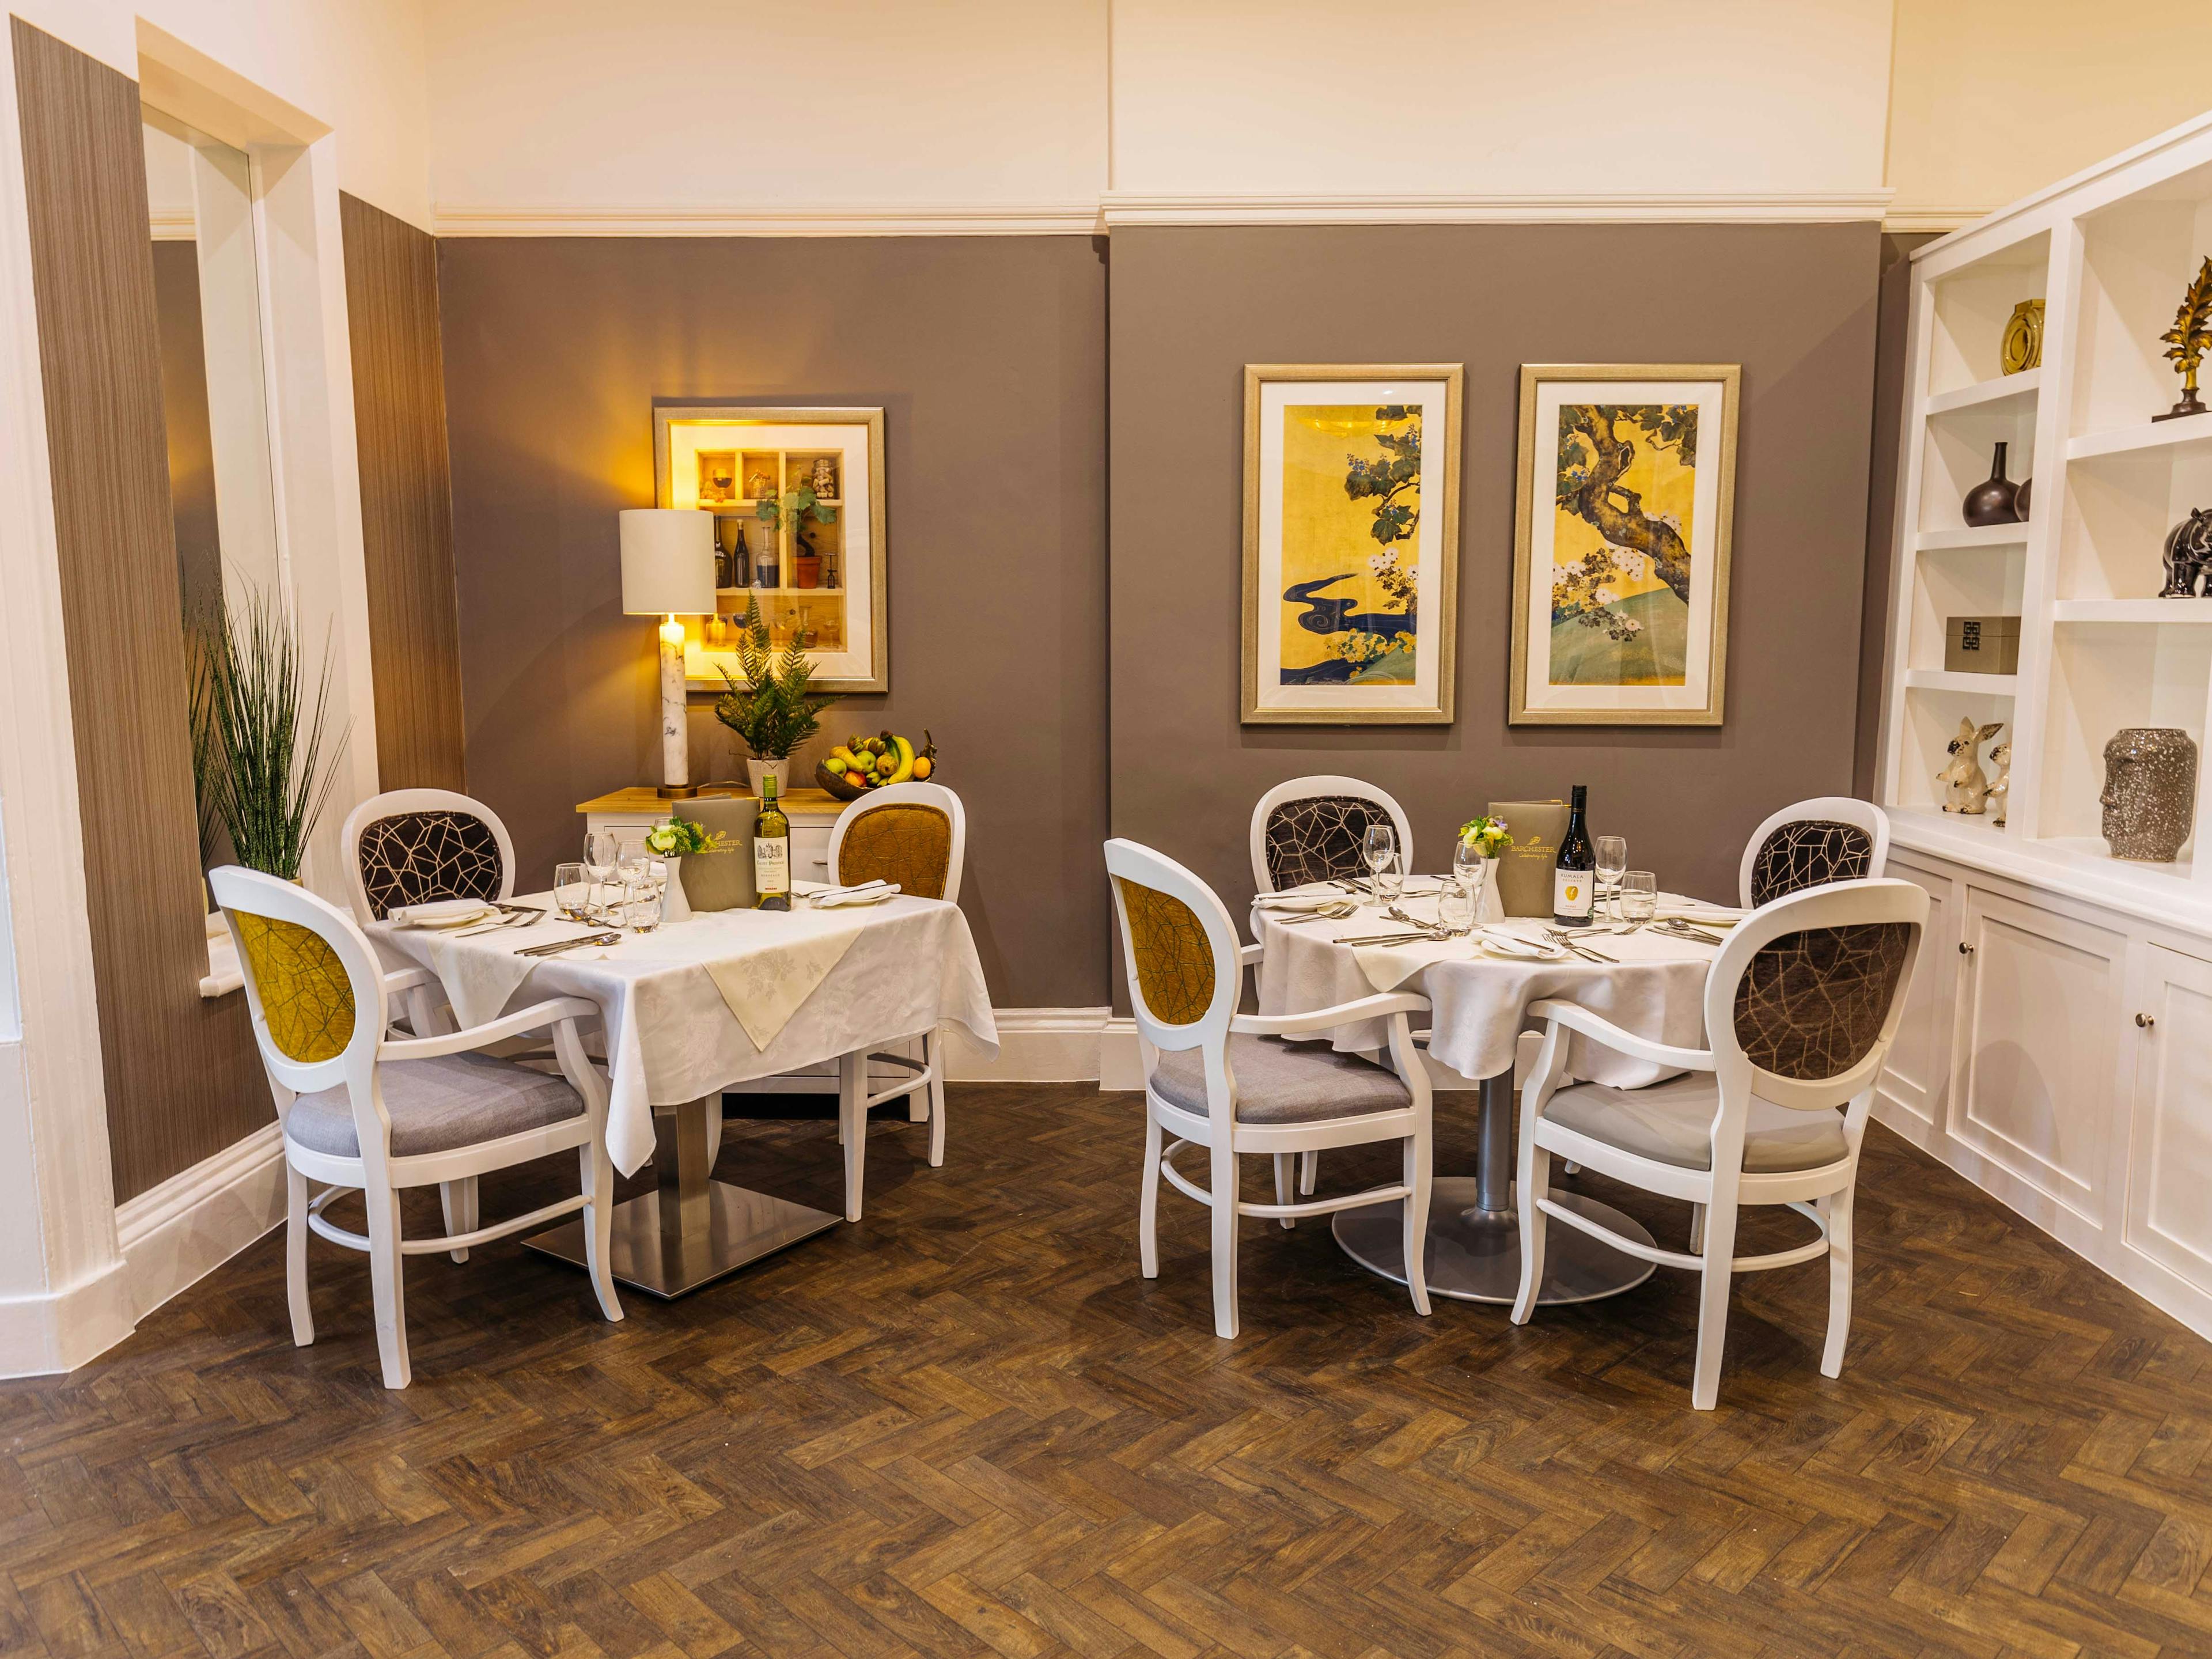 Dining Room at Lawton Manor Care Home in Kidsgrove, Newcastle-under-Lyme